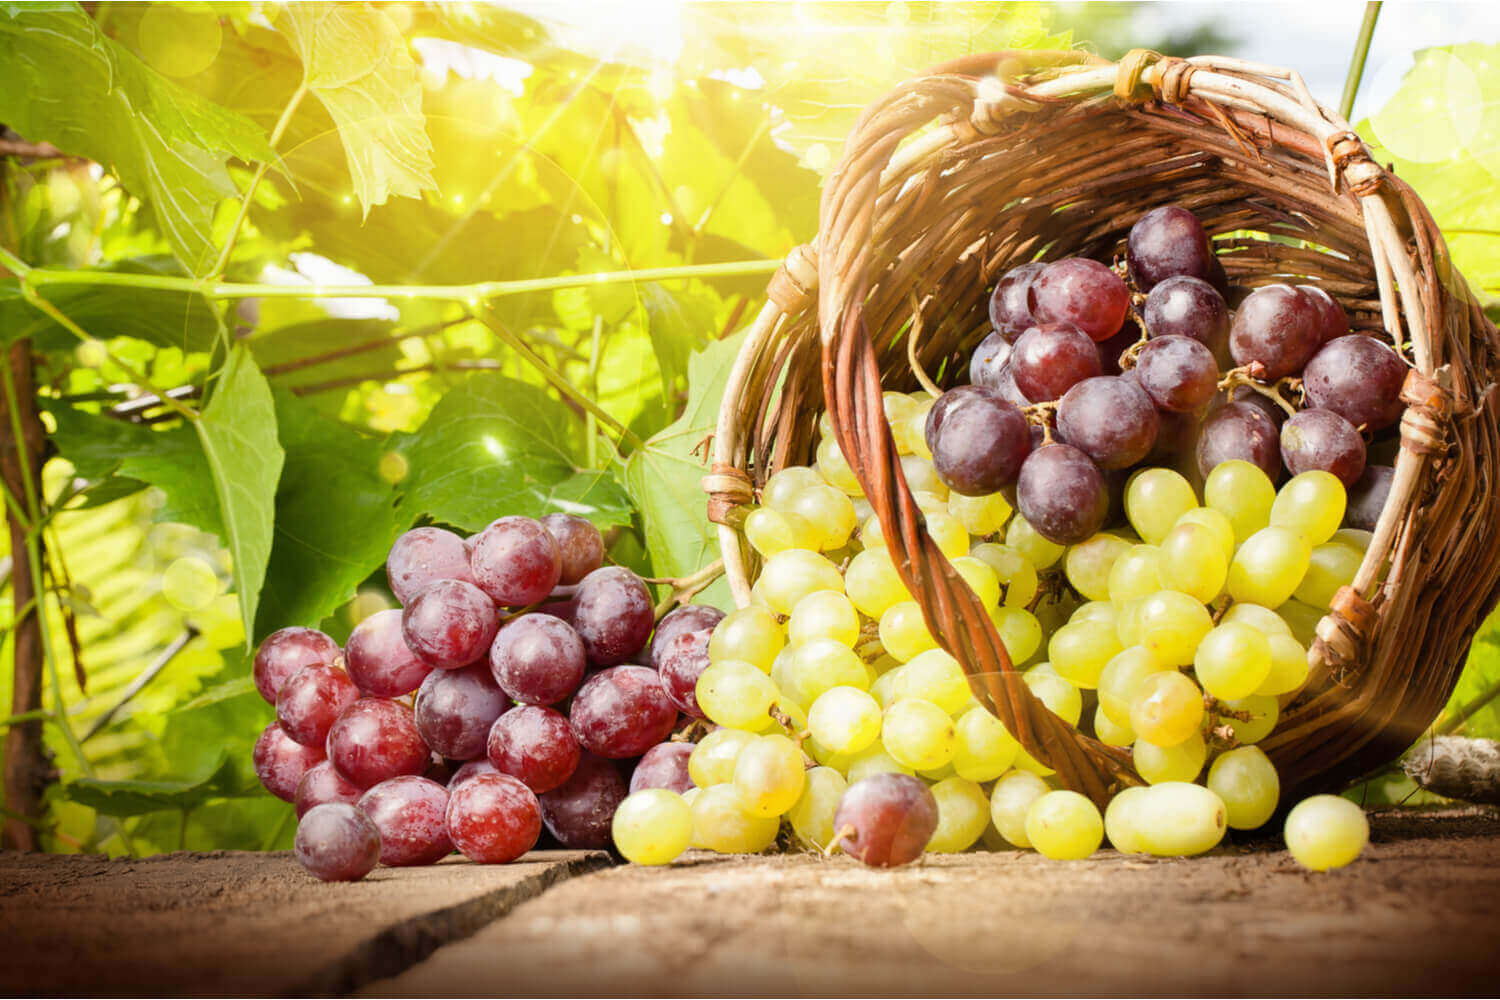 Grapes for Babies - Nutritional Value And Benefits